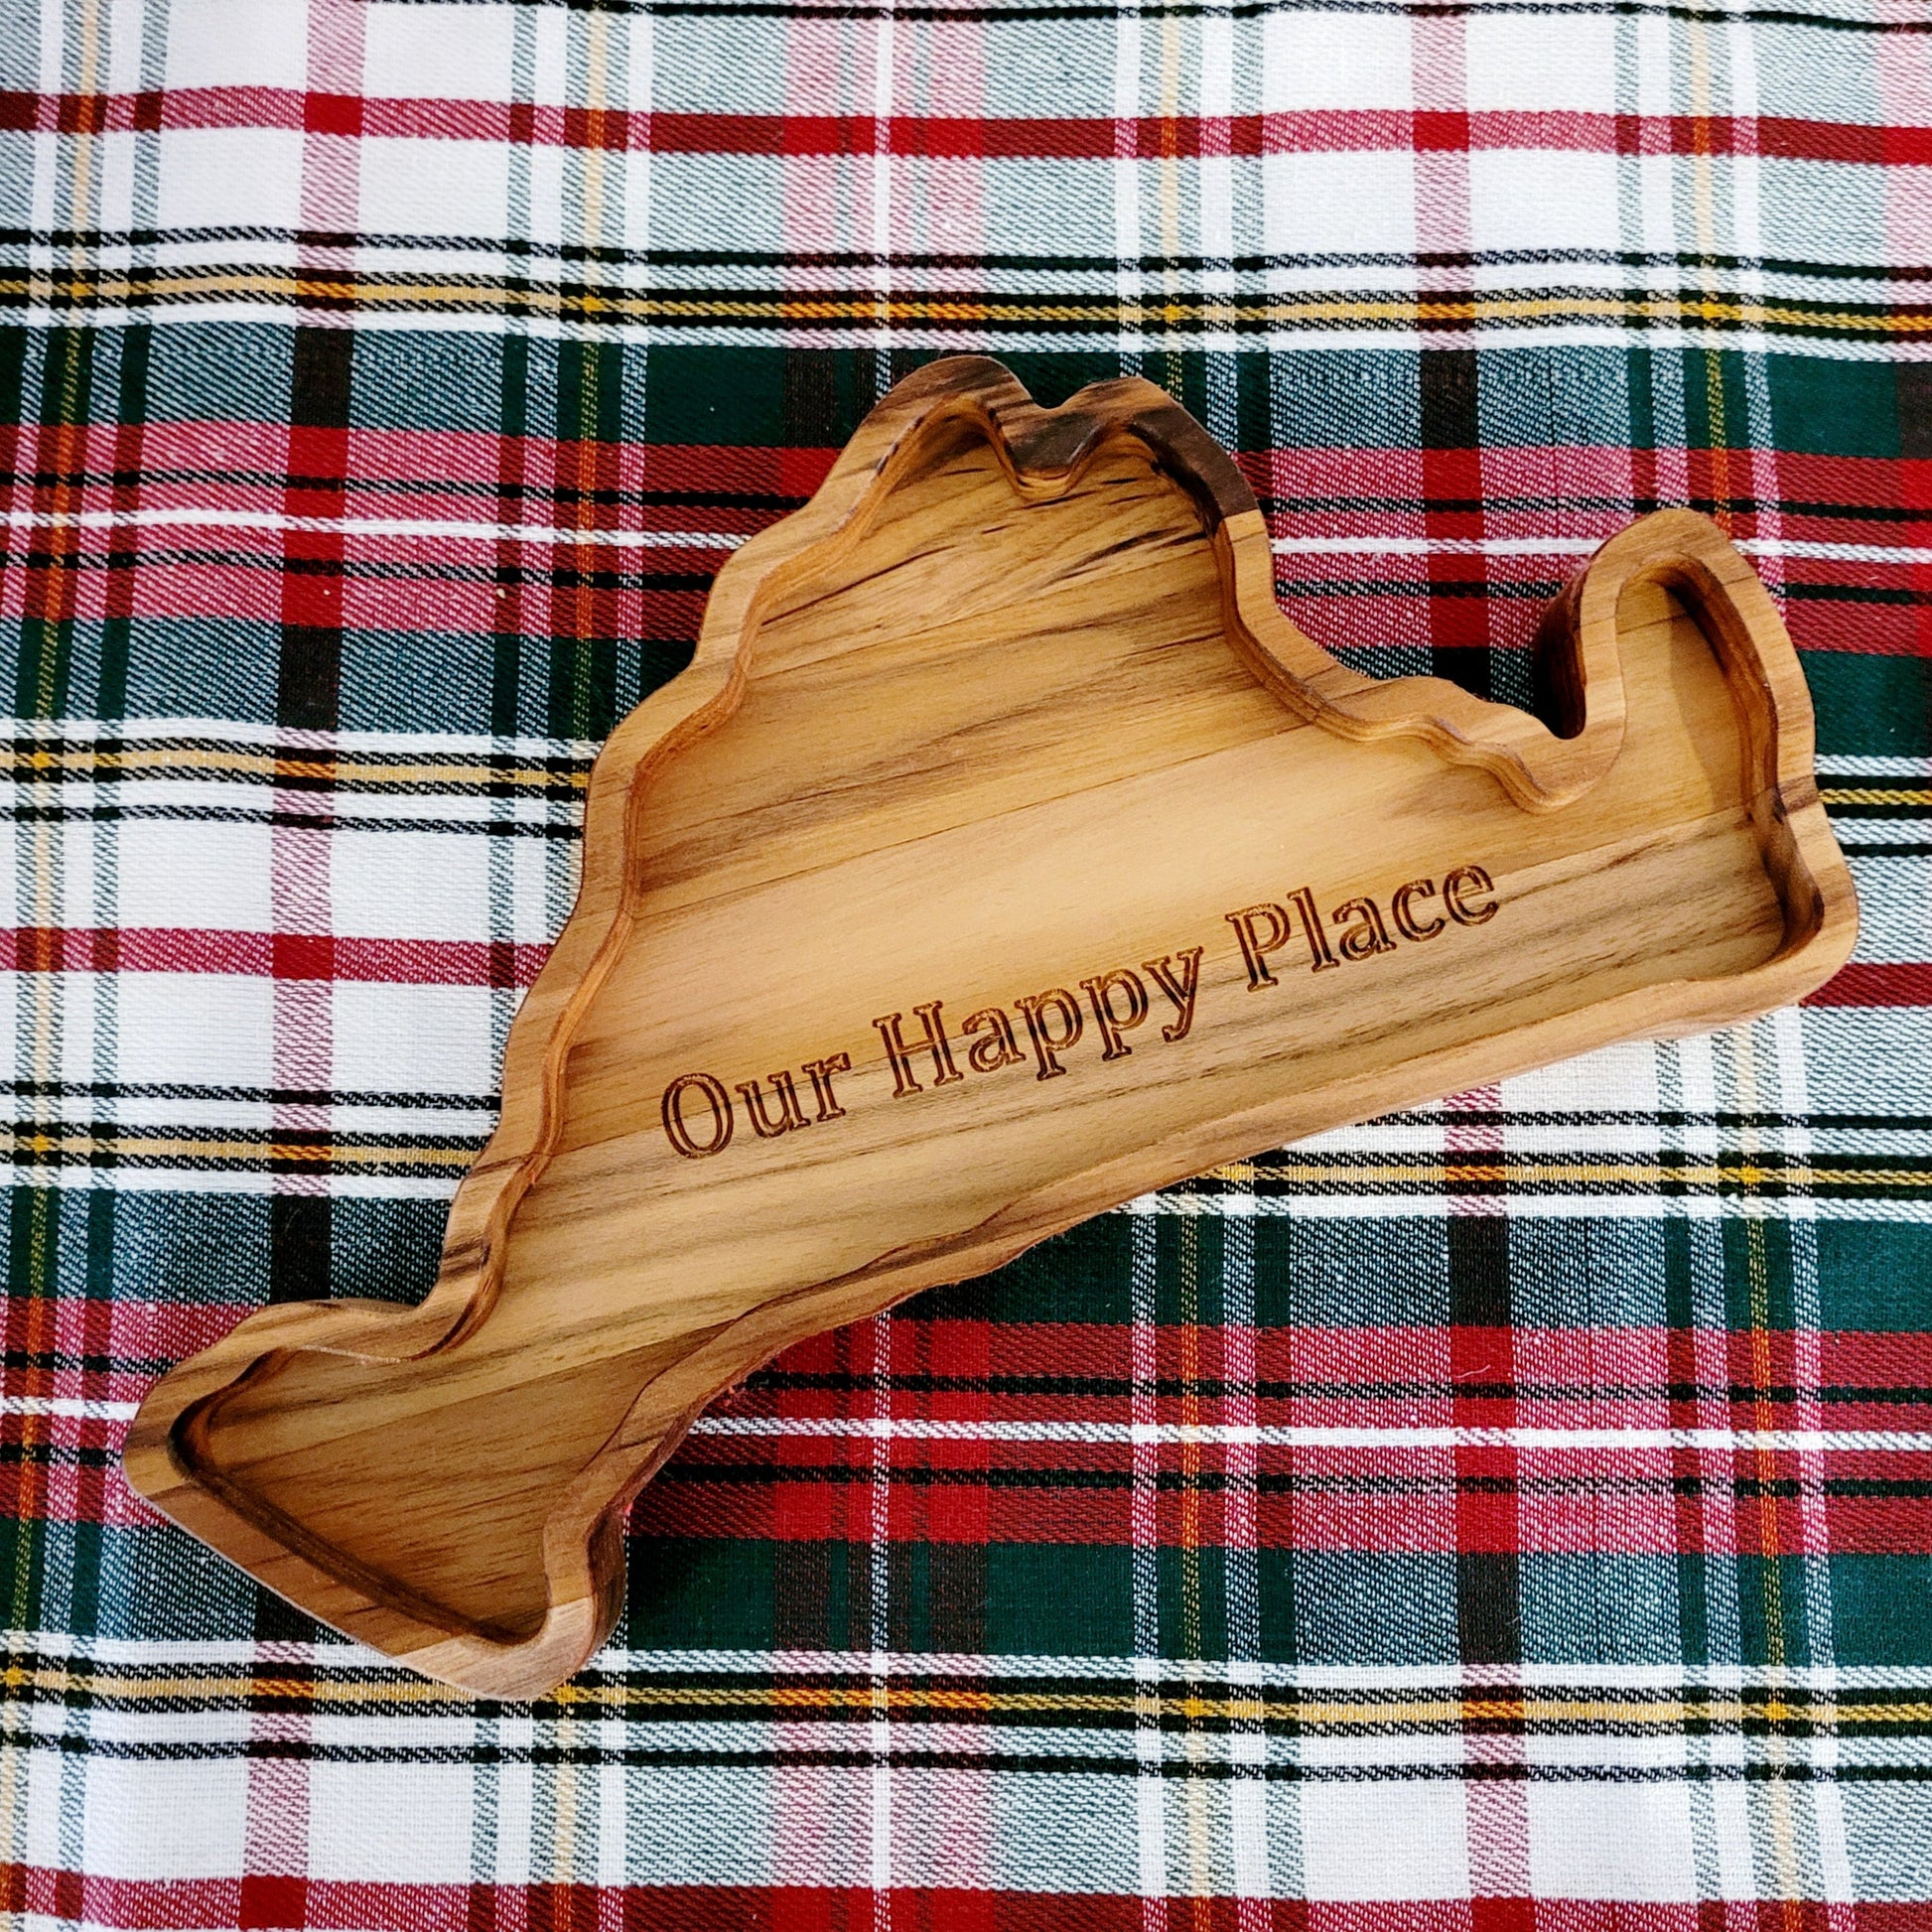 Martha's Vineyard Tray with Our Happy Place engraved